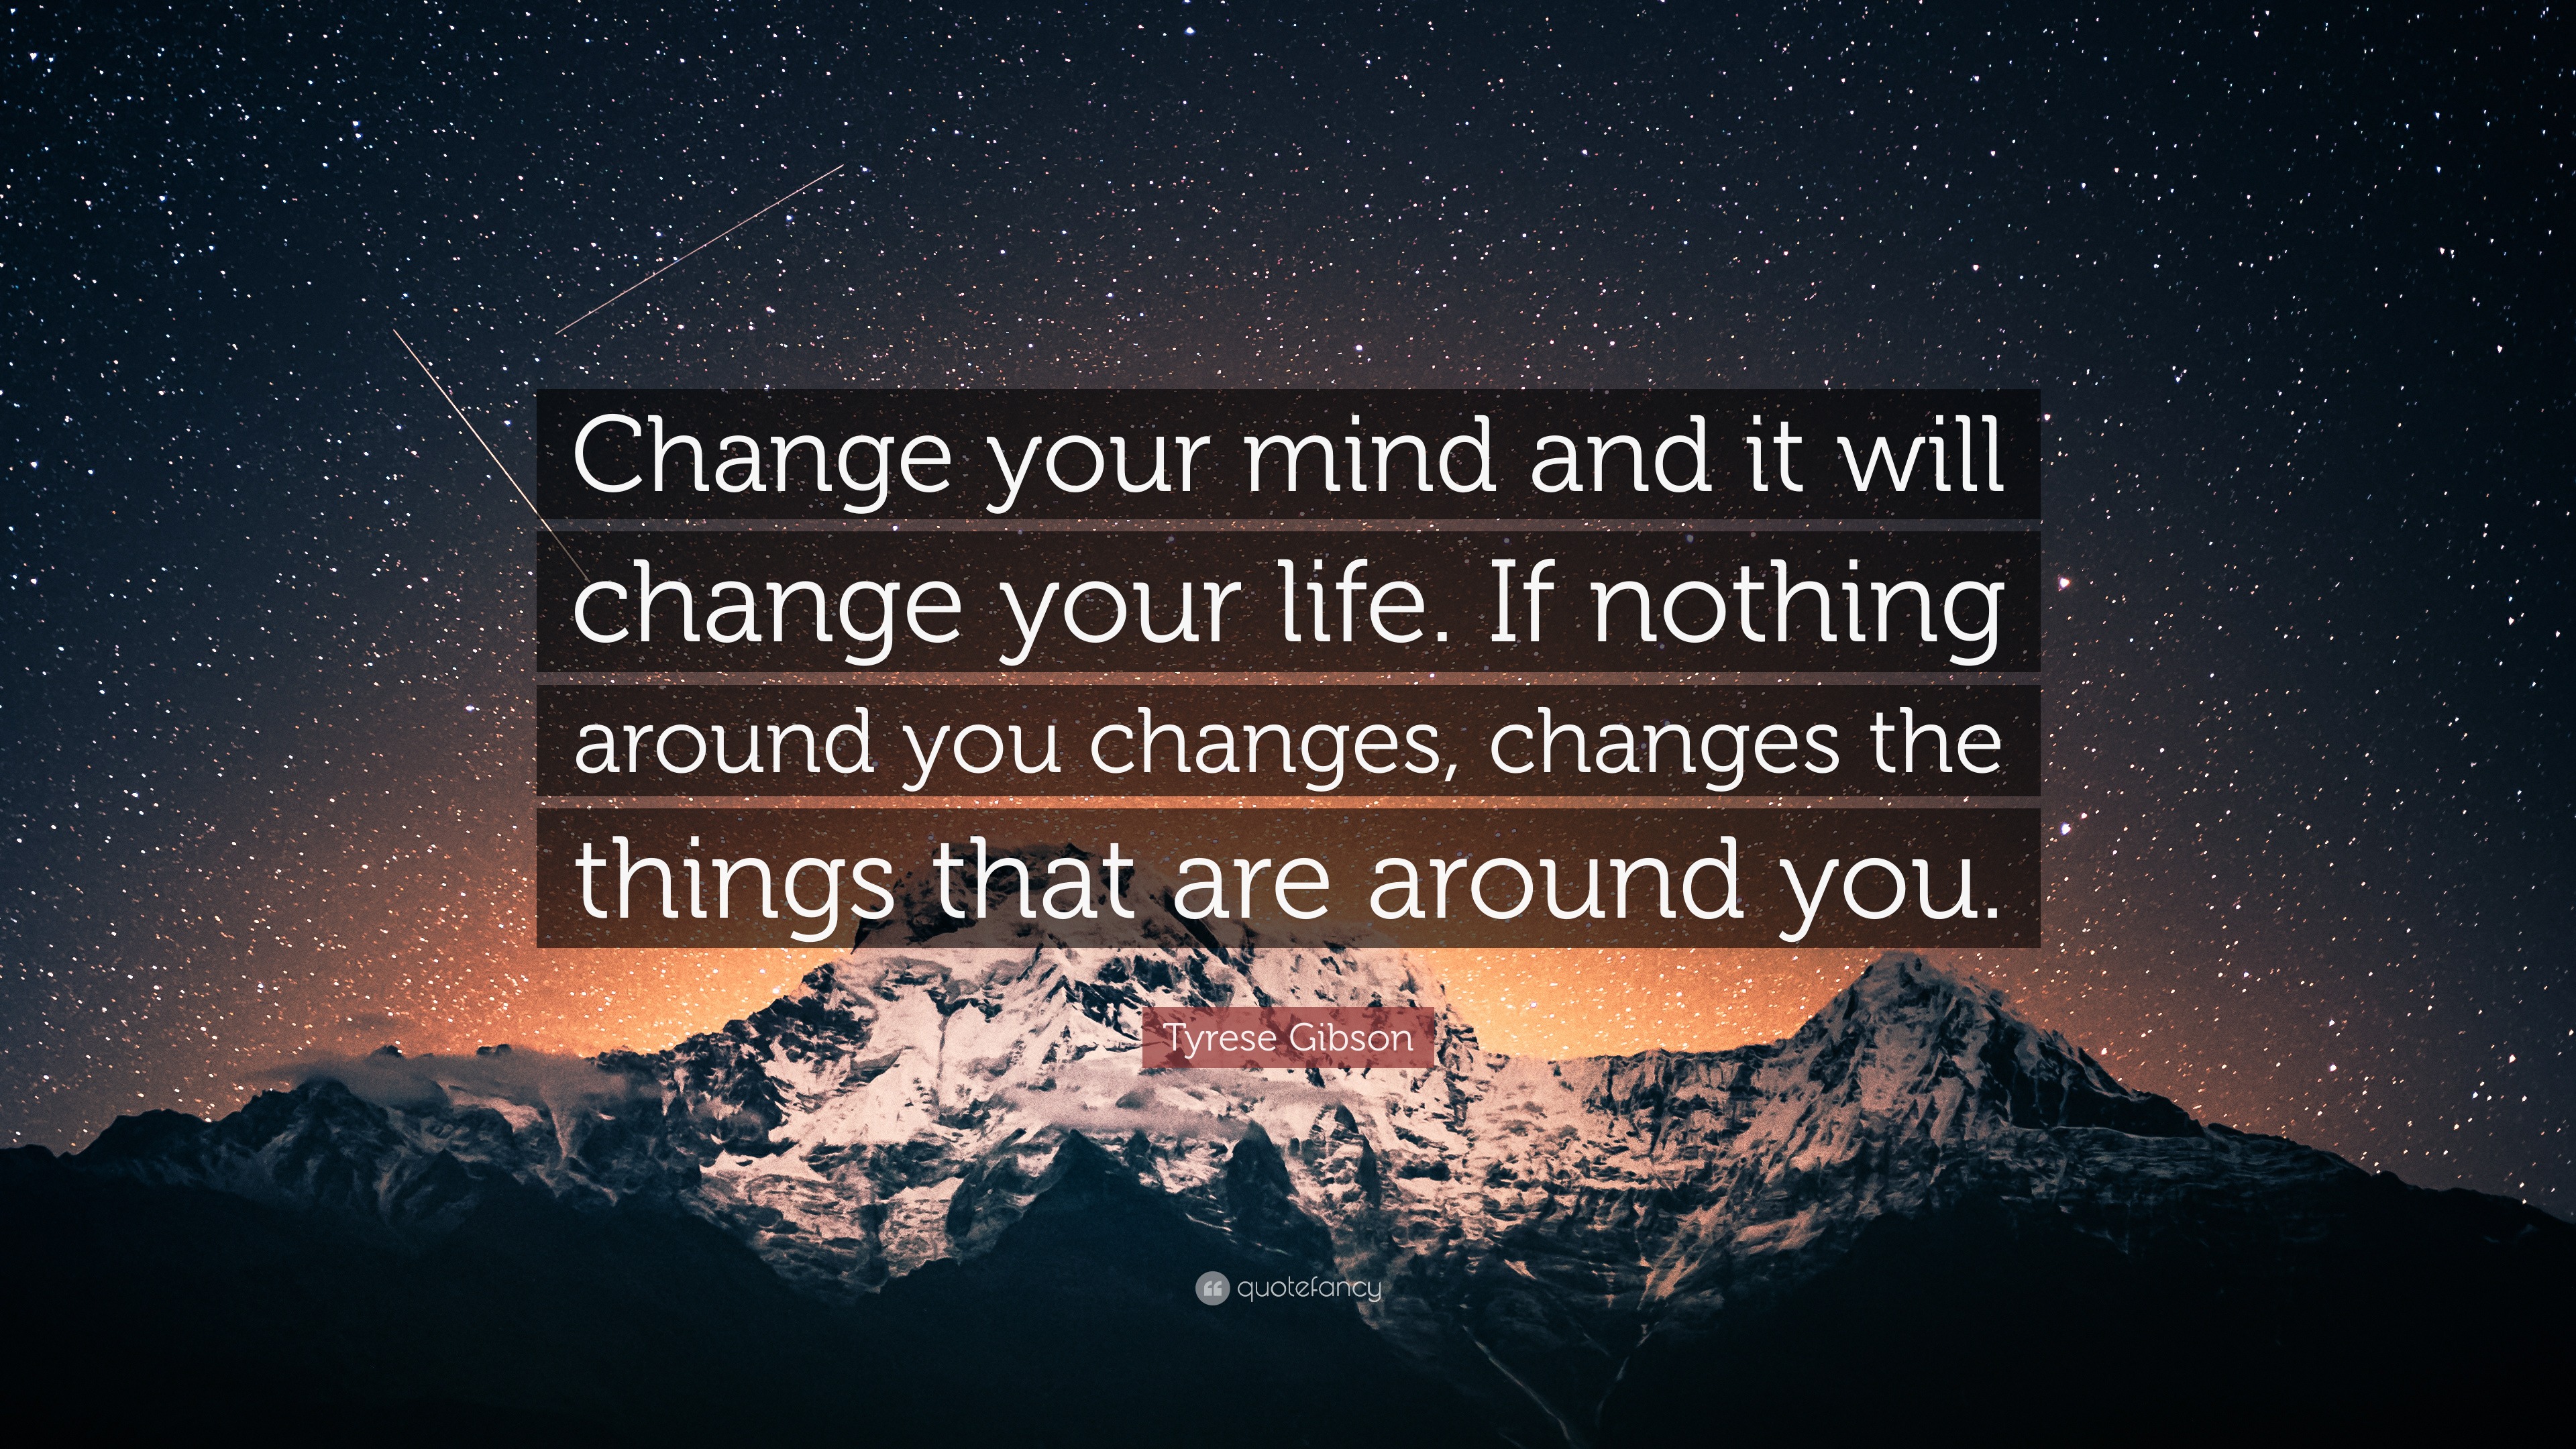 Tyrese Gibson Quote: “Change your mind and it will change your life. If